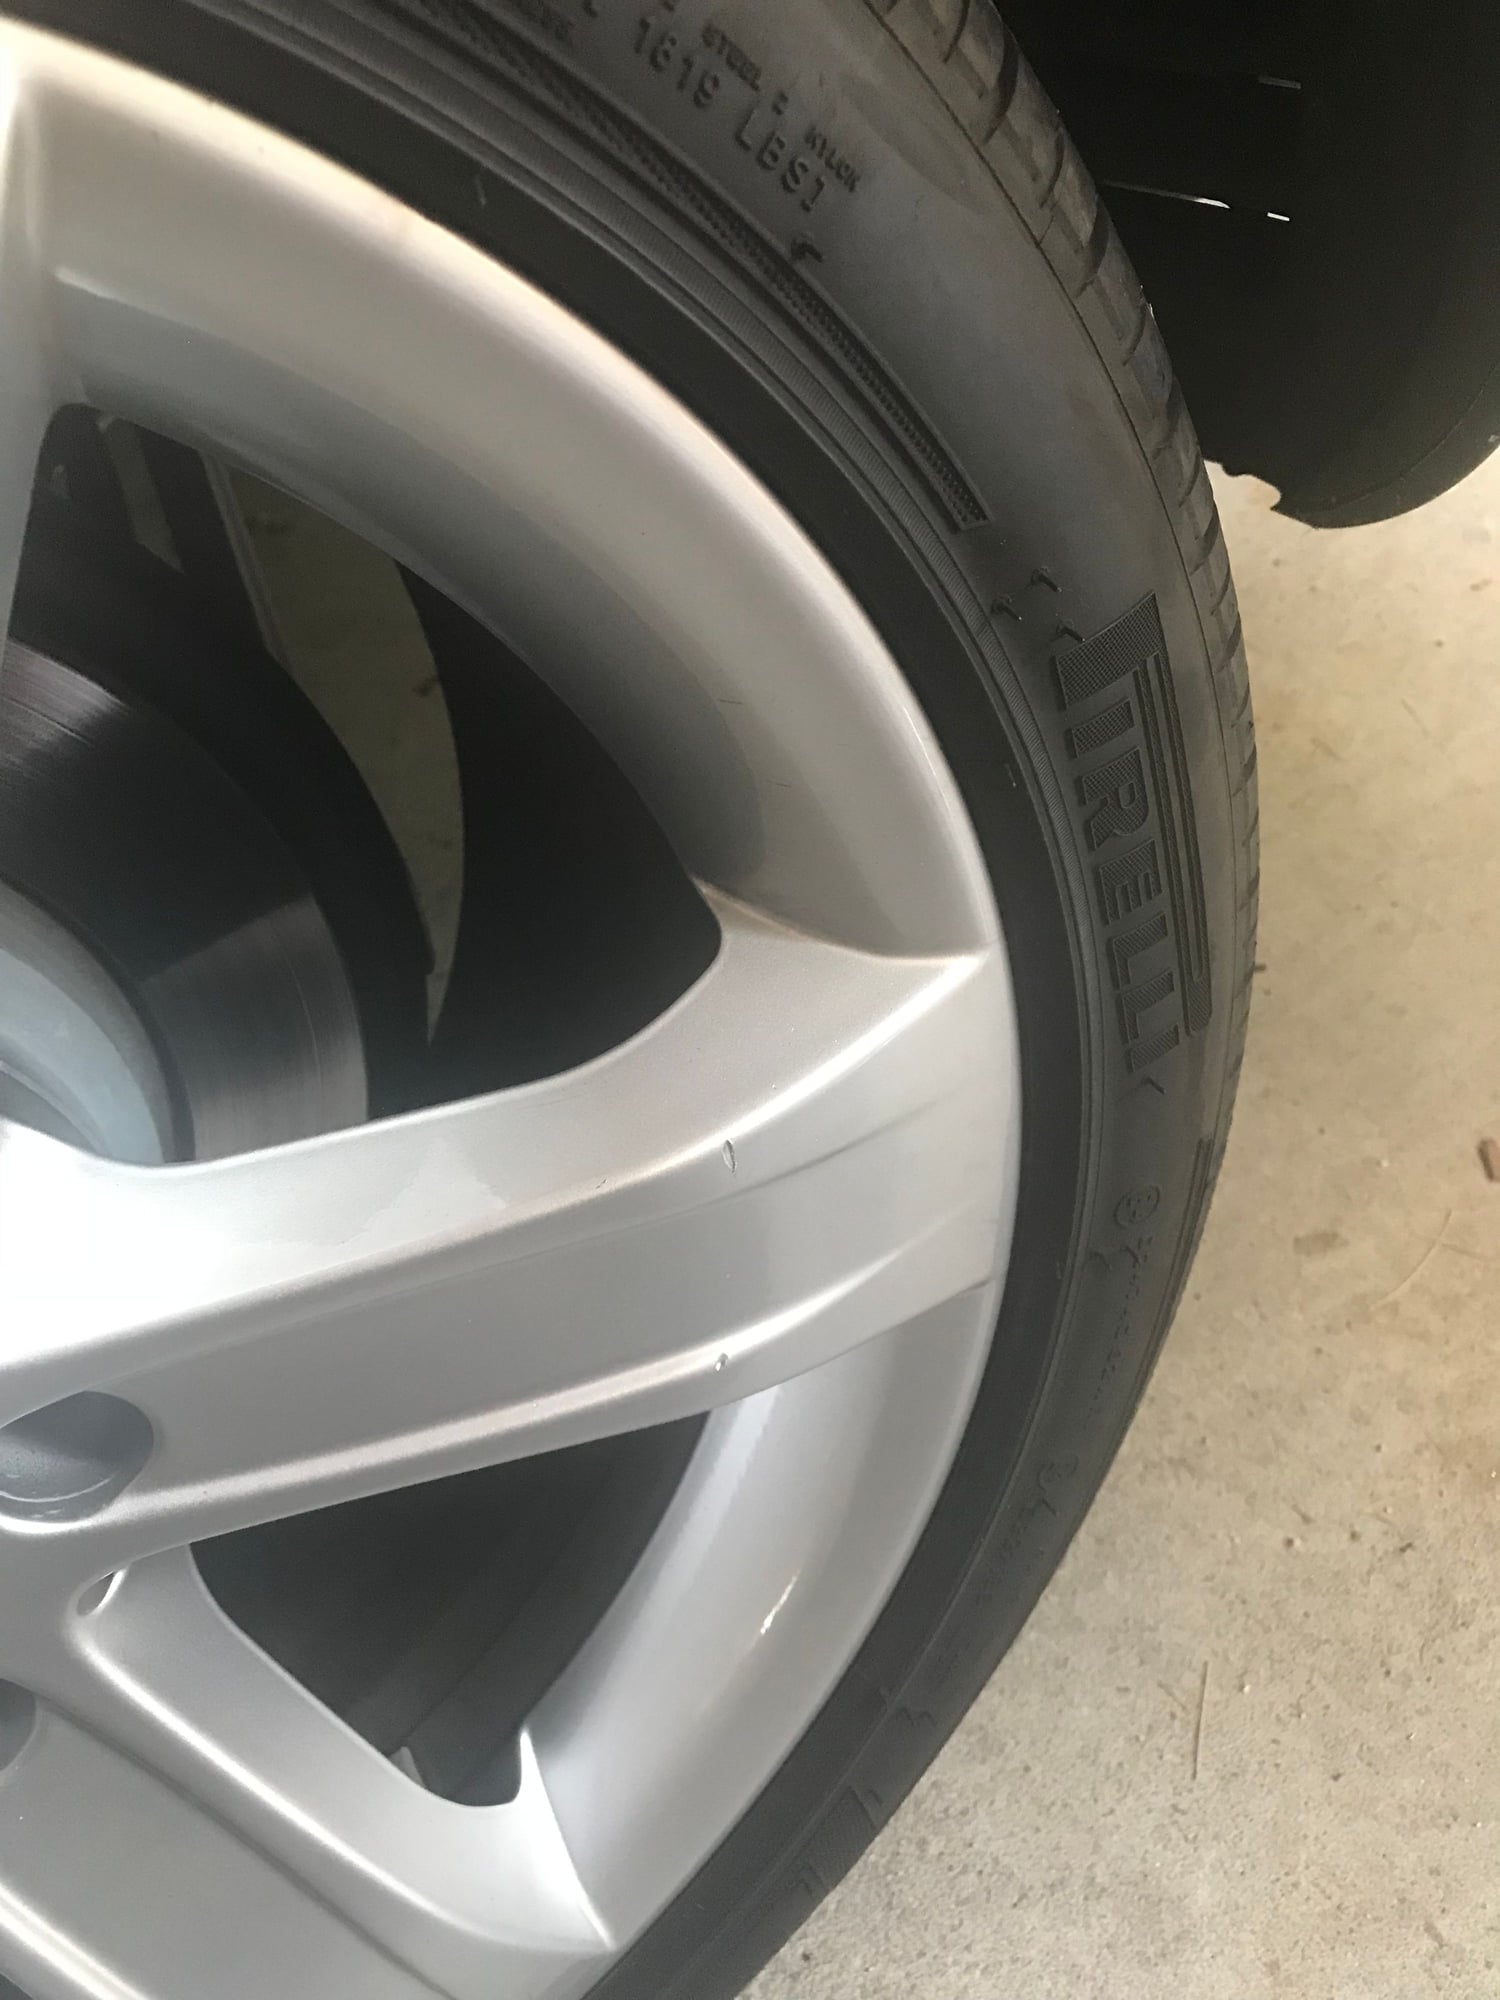 Wheels and Tires/Axles - 2009 SL550 Wheel and tires - Used - 2009 to 2012 Mercedes-Benz SL550 - Hudson, NH 03051, United States